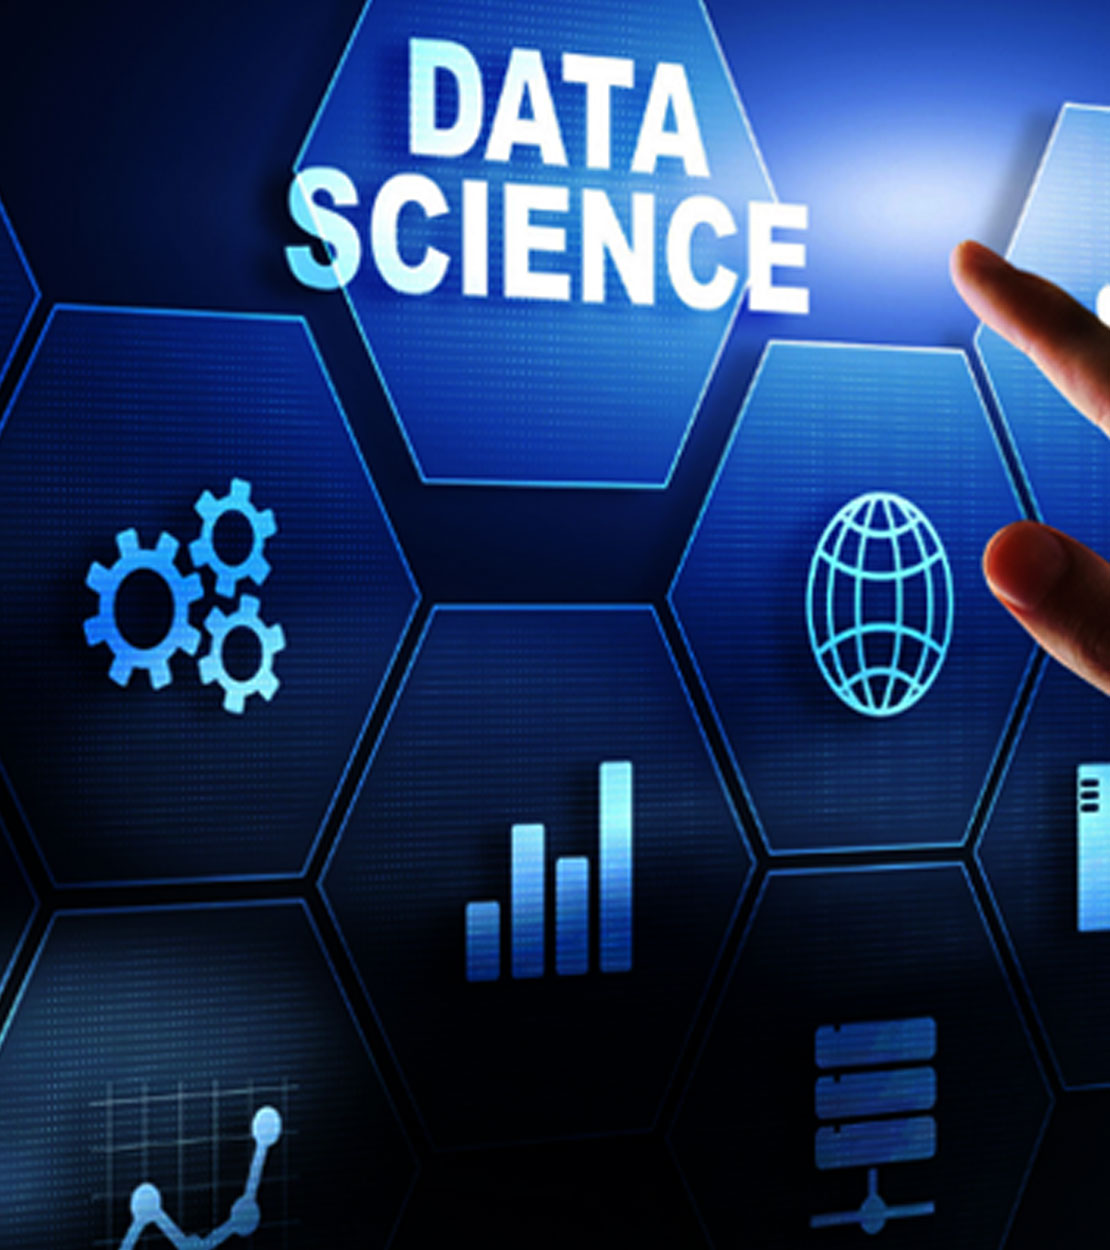 Data Science Tools: What’s Their Role and Why Are They Important?